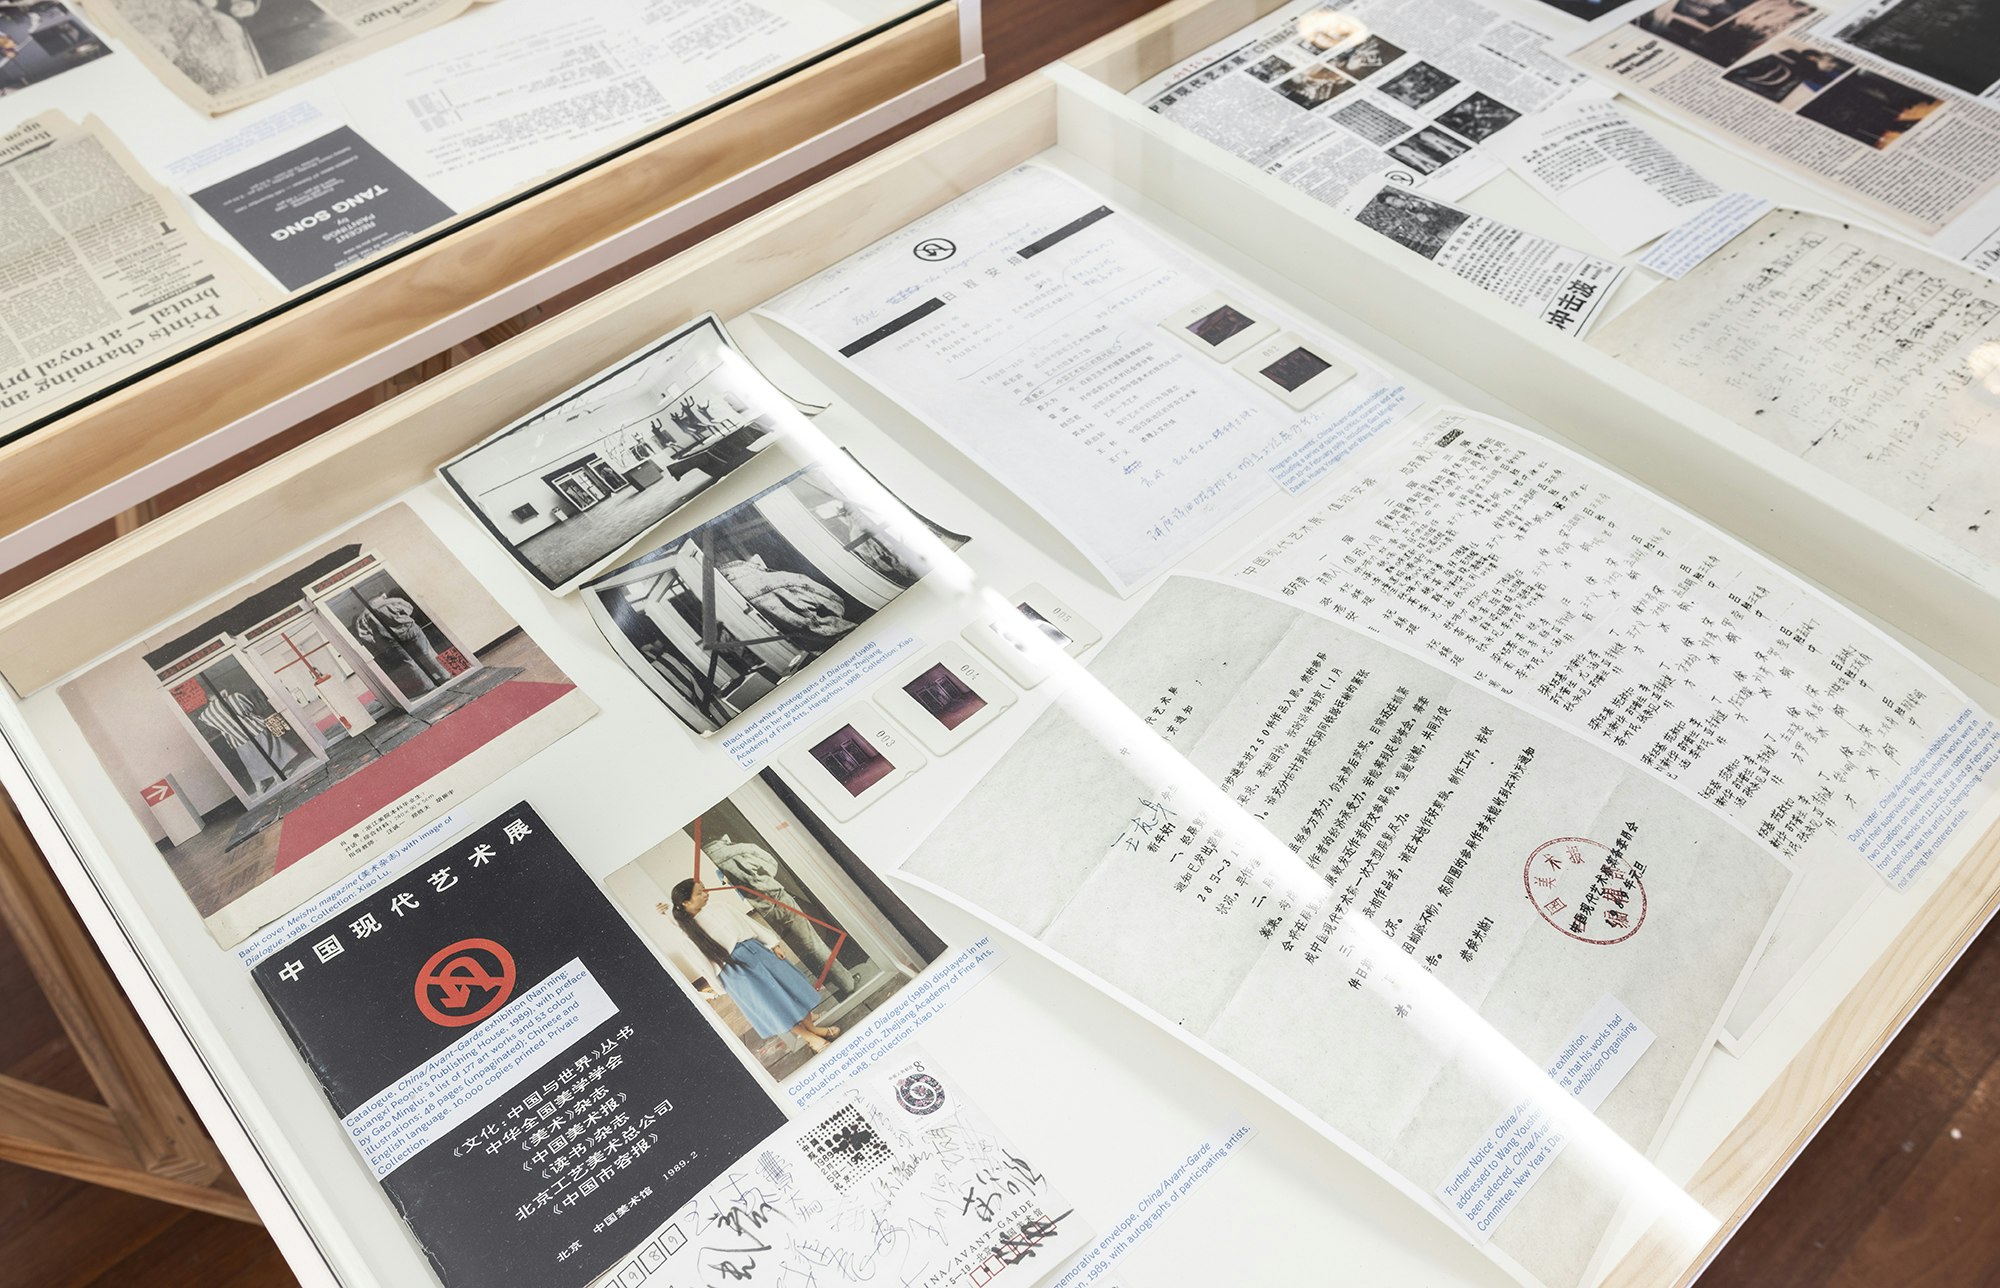 Chinese language pamphlets, newspaper clippings and photo prints in a glass display cabinet